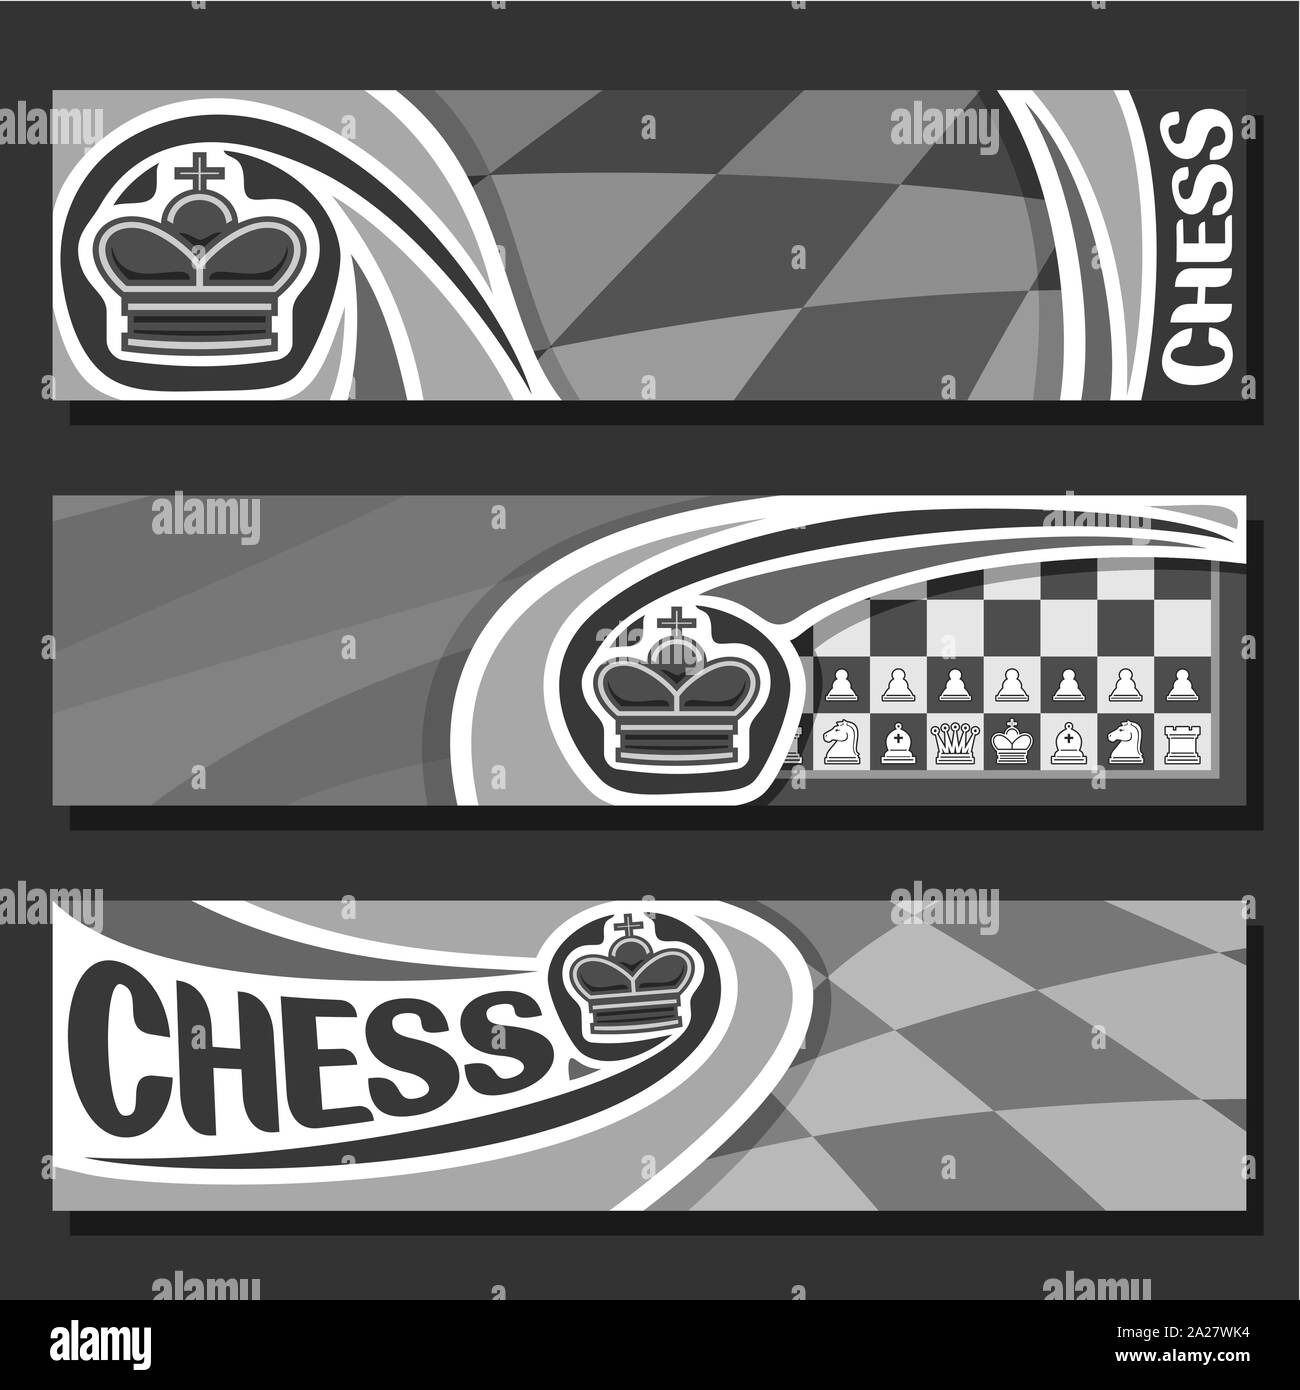 Vector monochrome banners for Chess game with copy space, in headers black & white curved checkerboard squares for title on chess theme, original font Stock Vector